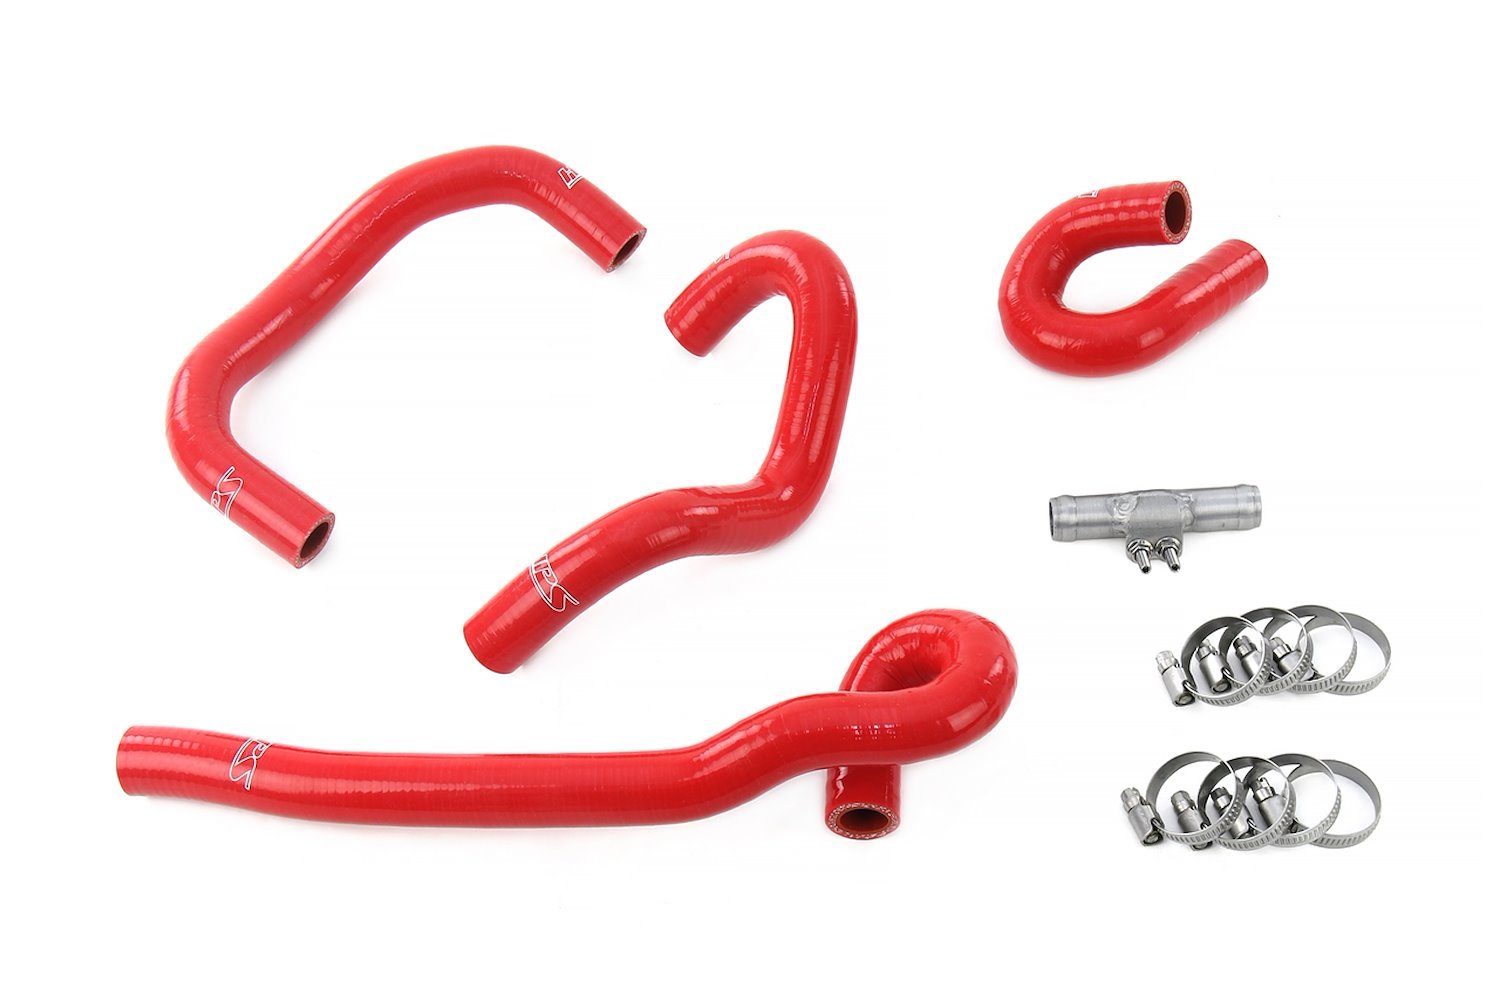 57-2093-RED Heater Hose Kit, 3-Ply Reinforced Silicone, Replaces Rubber Heater Hoses